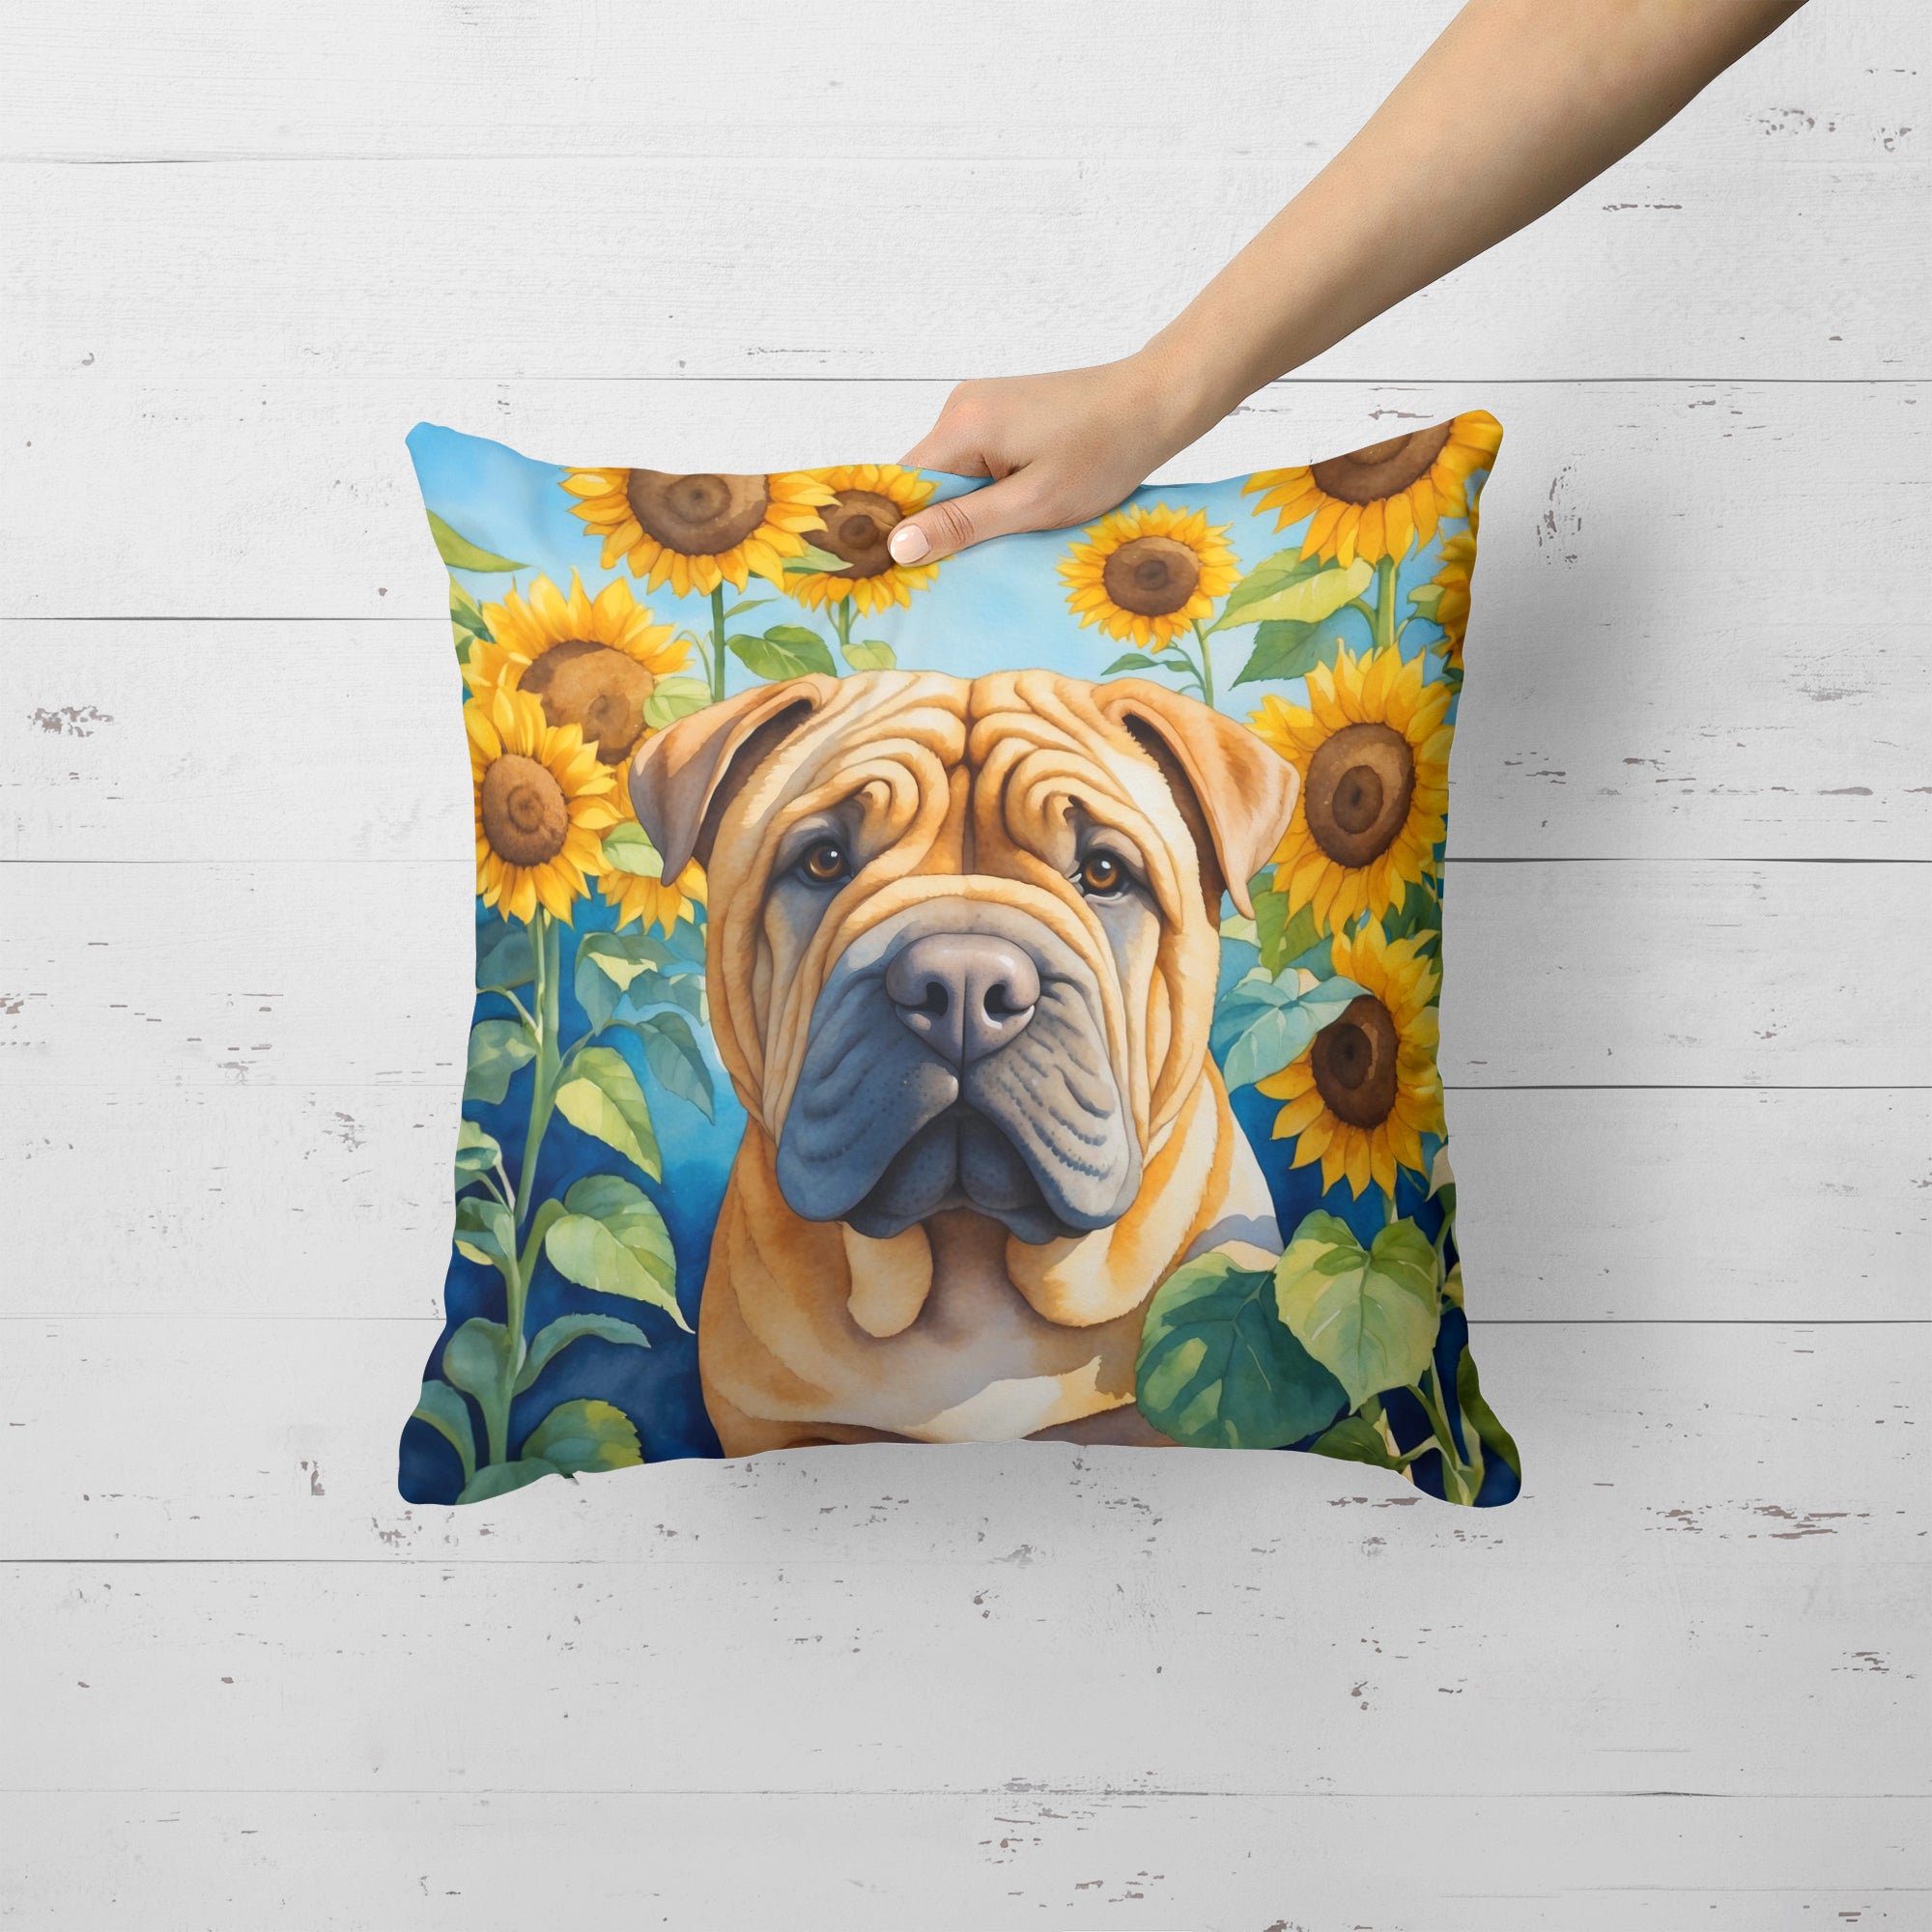 Buy this Shar Pei in Sunflowers Throw Pillow